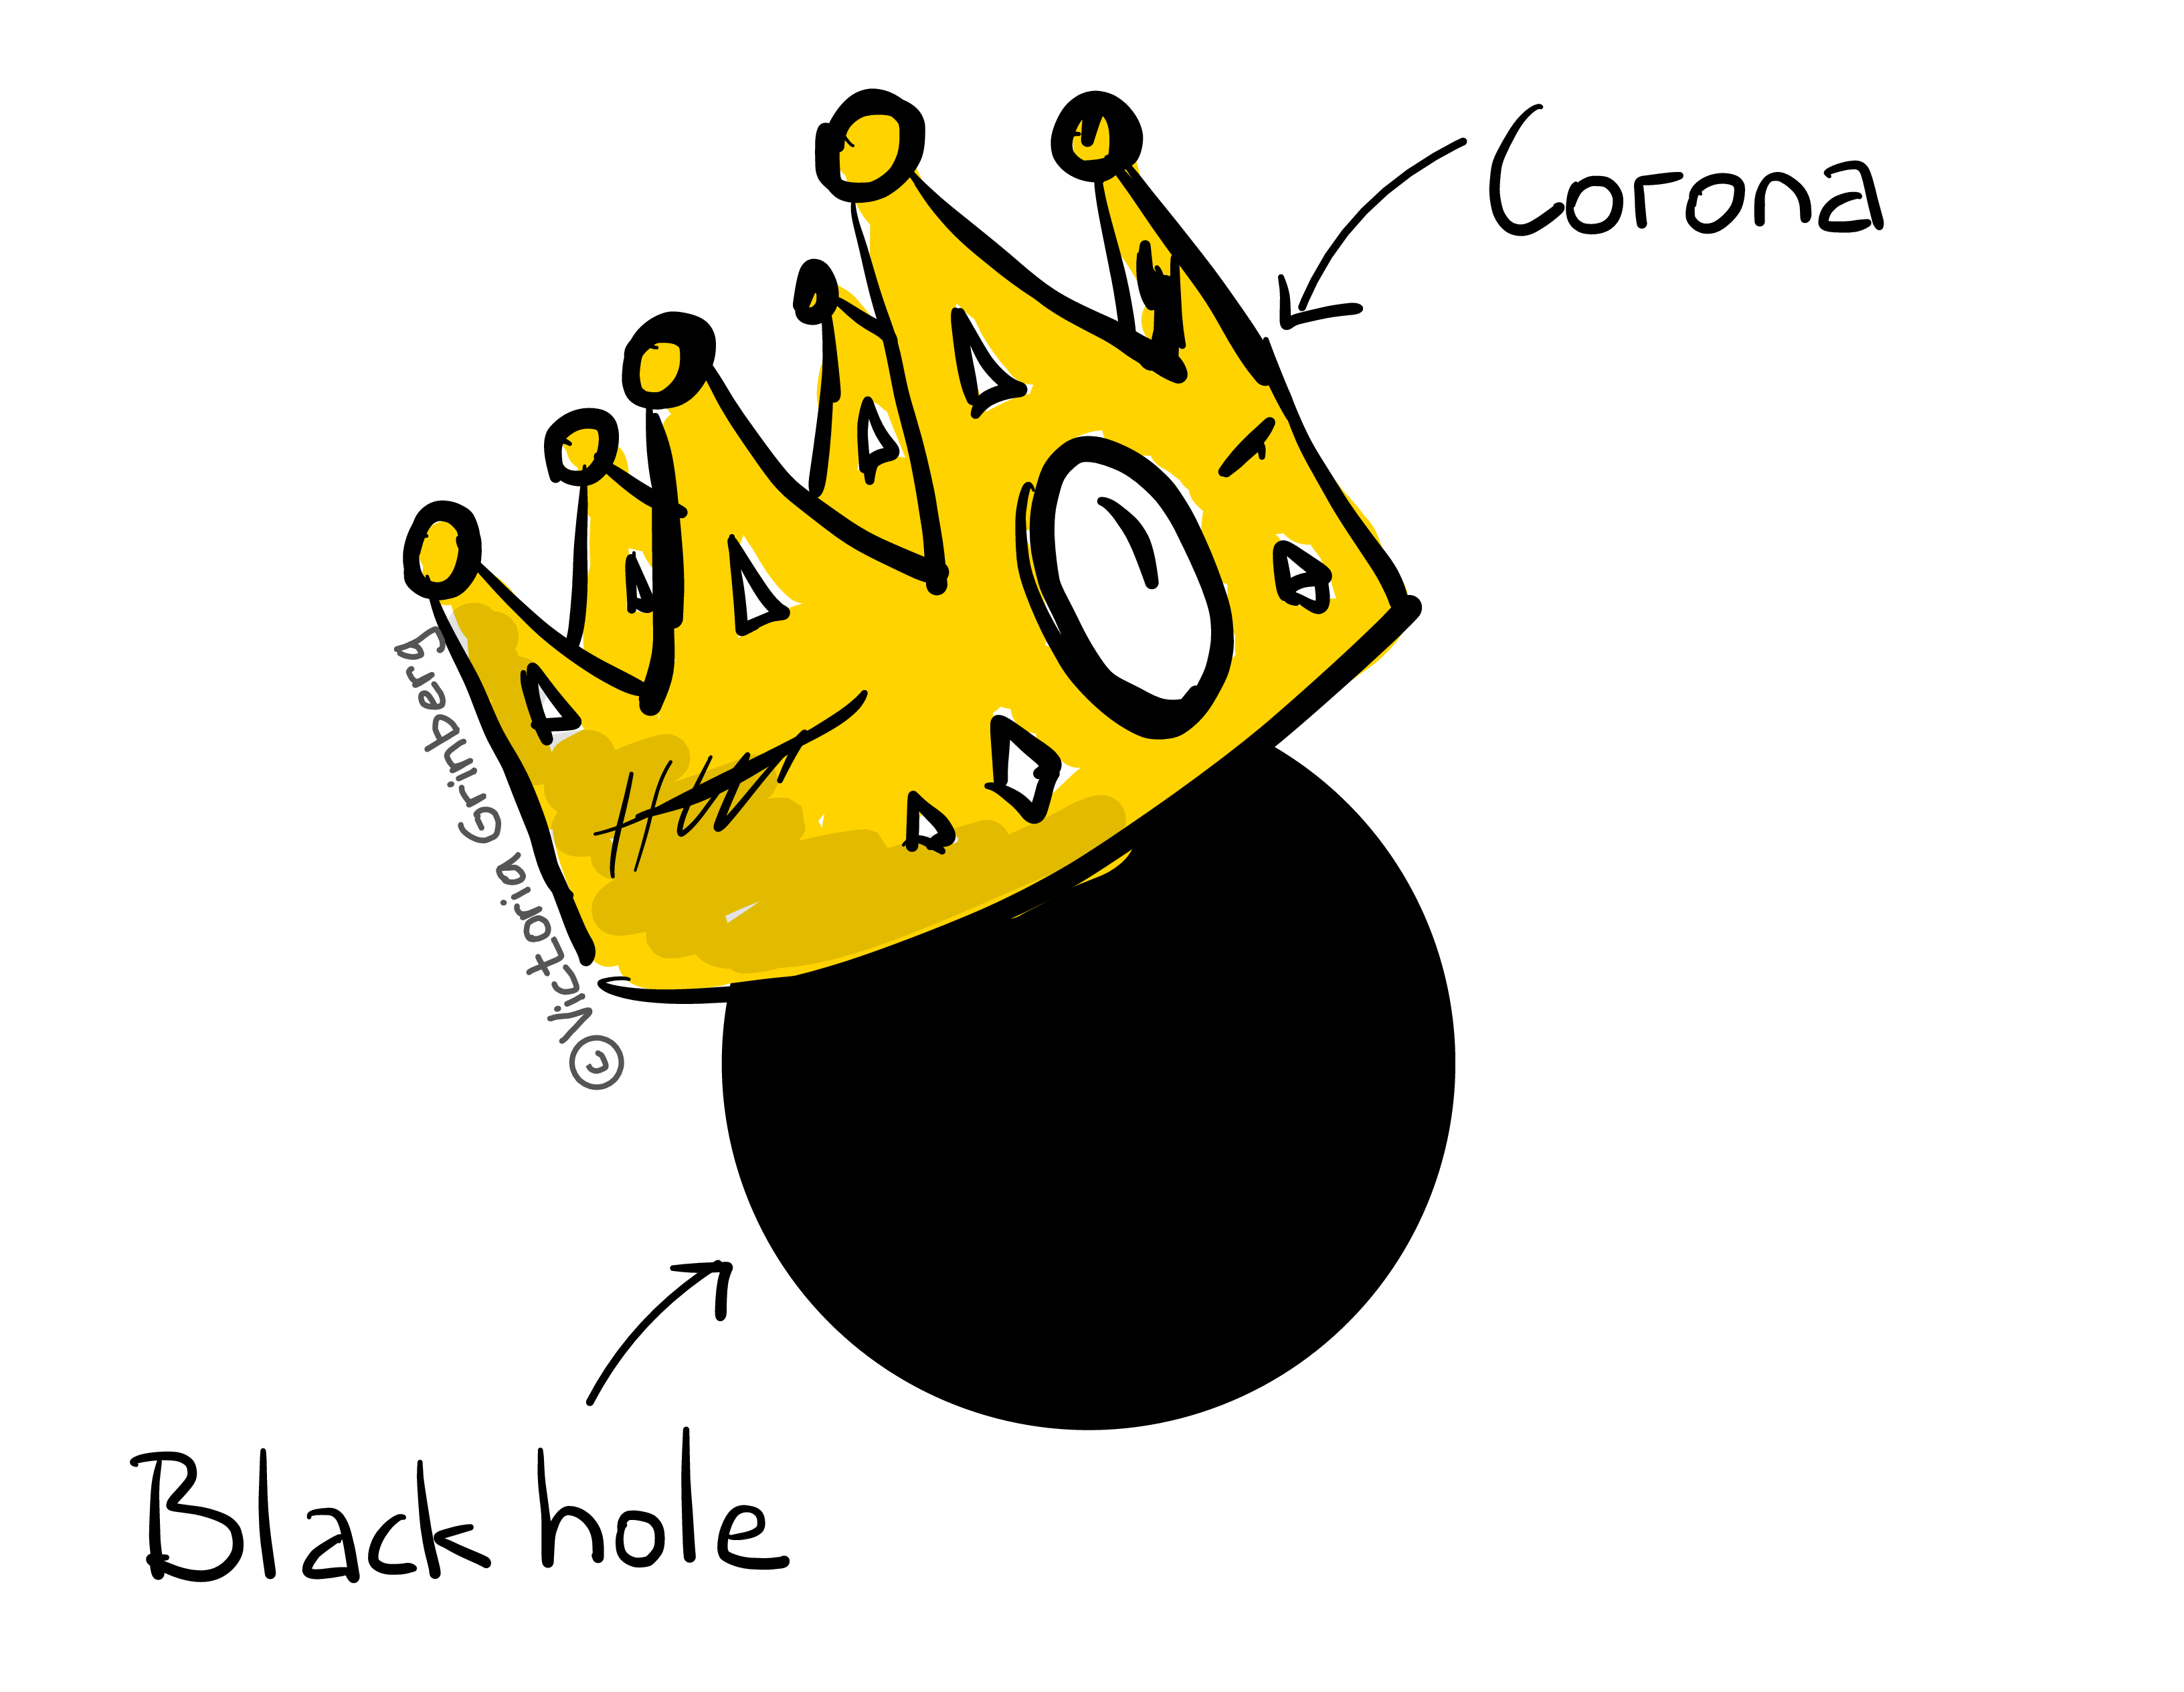 A black hole (big black circle) with a doodled yellow/golden crown. Two arrows: one pointing to the black hole with the label 'black hole', the other pointing to the crown with the label 'corona'.